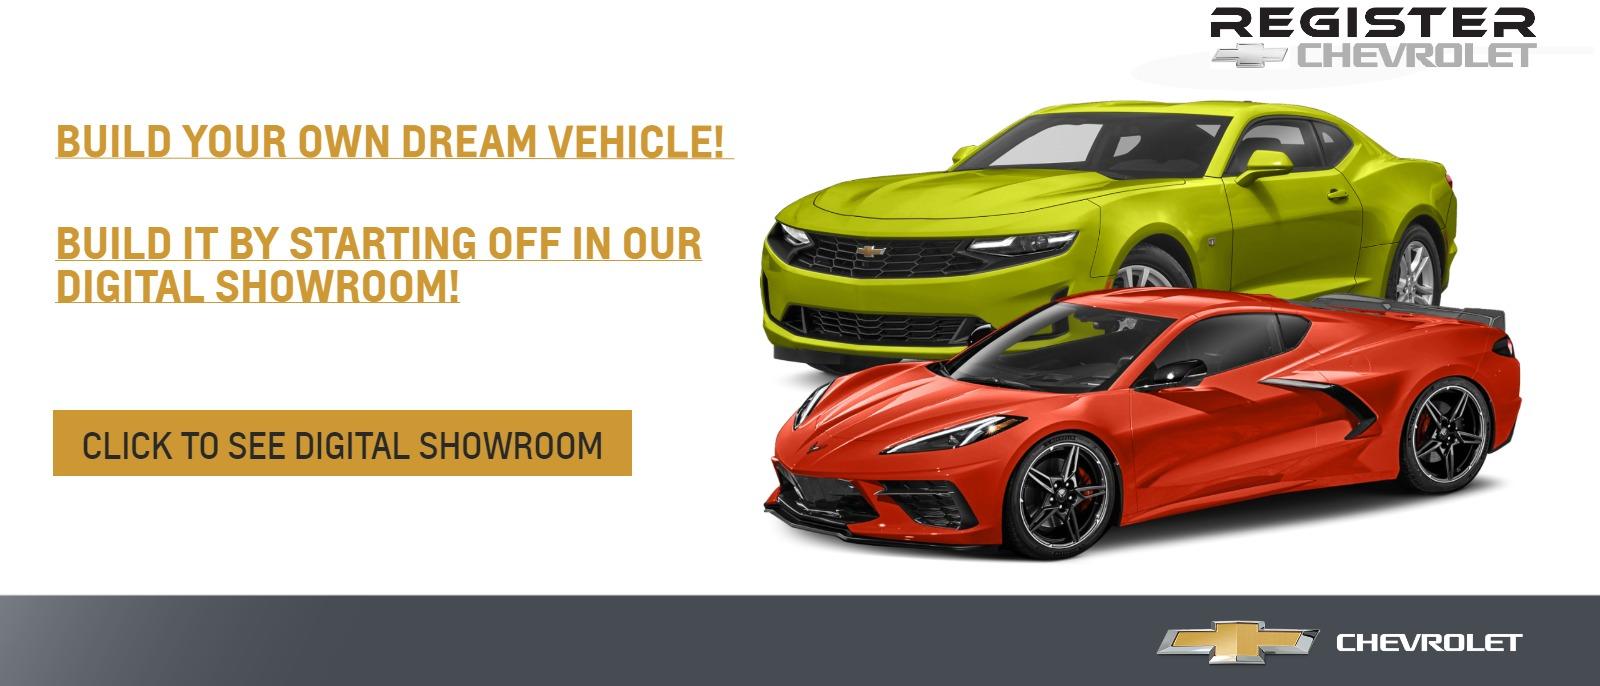 Build Your Own Dream Vehicle! Build it by starting off in our Digital Showroom!